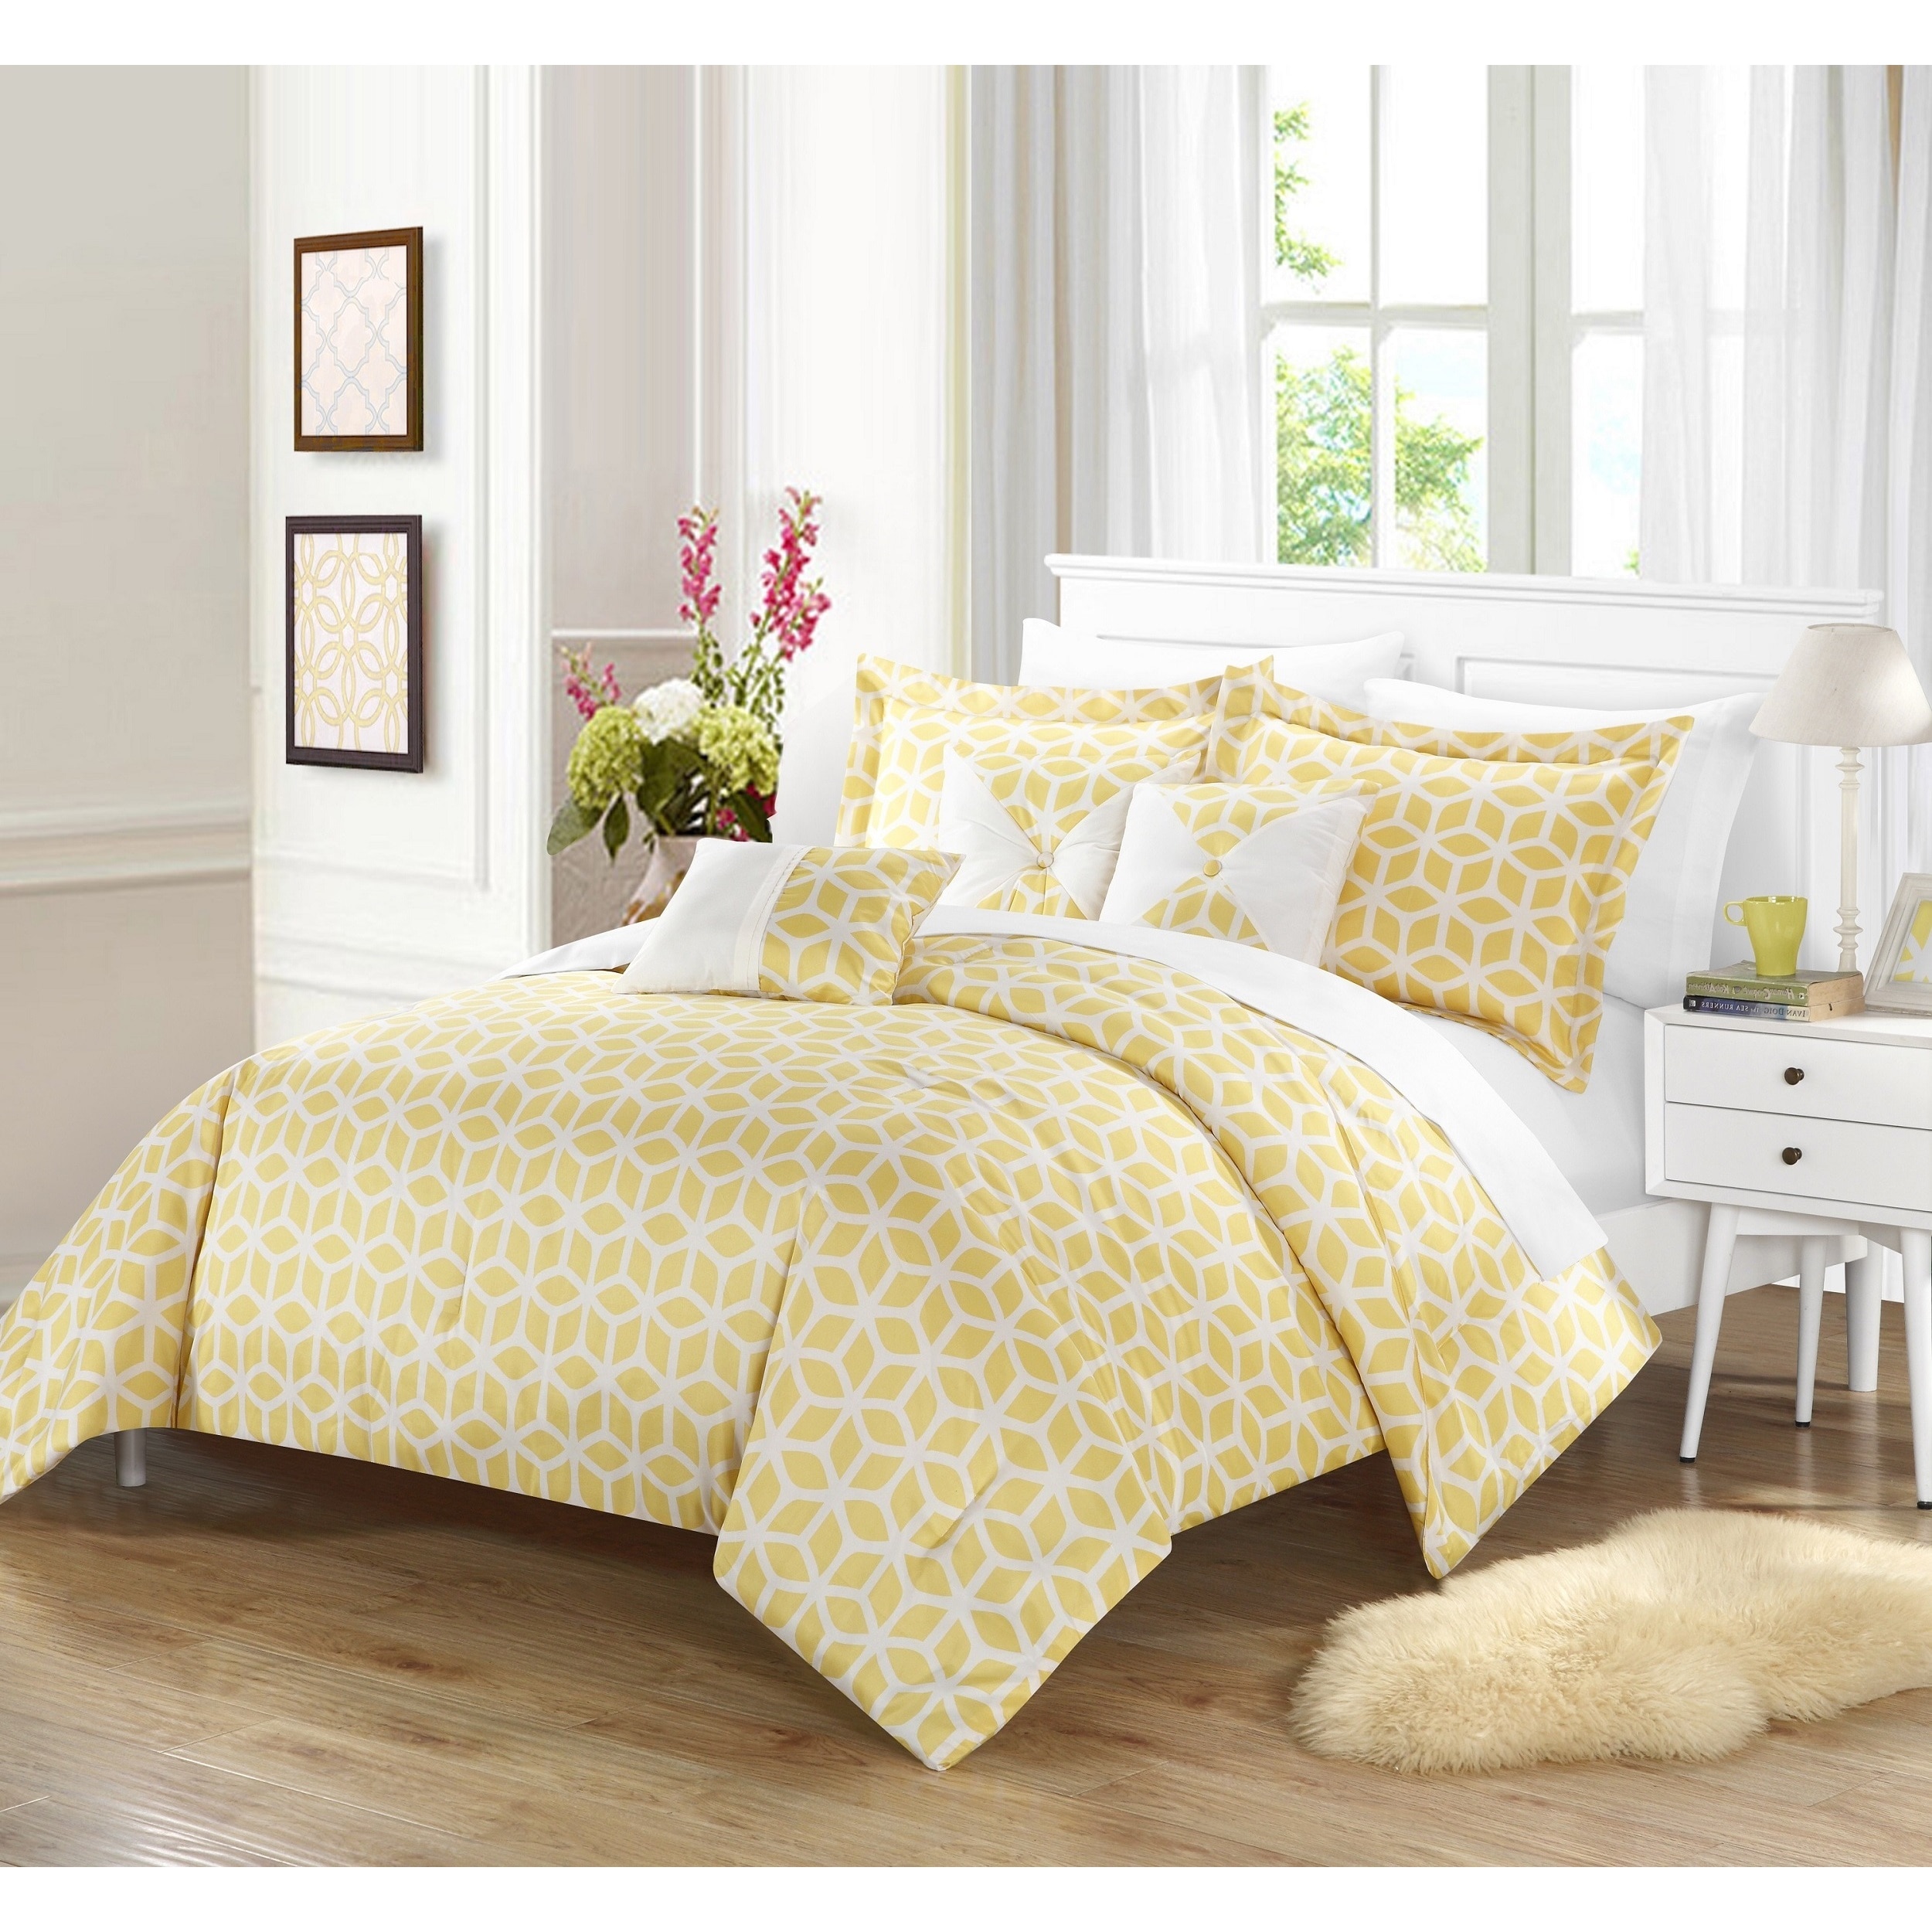 Shop Chic Home Ritchelle Yellow  10 Piece Bed  in a Bag 